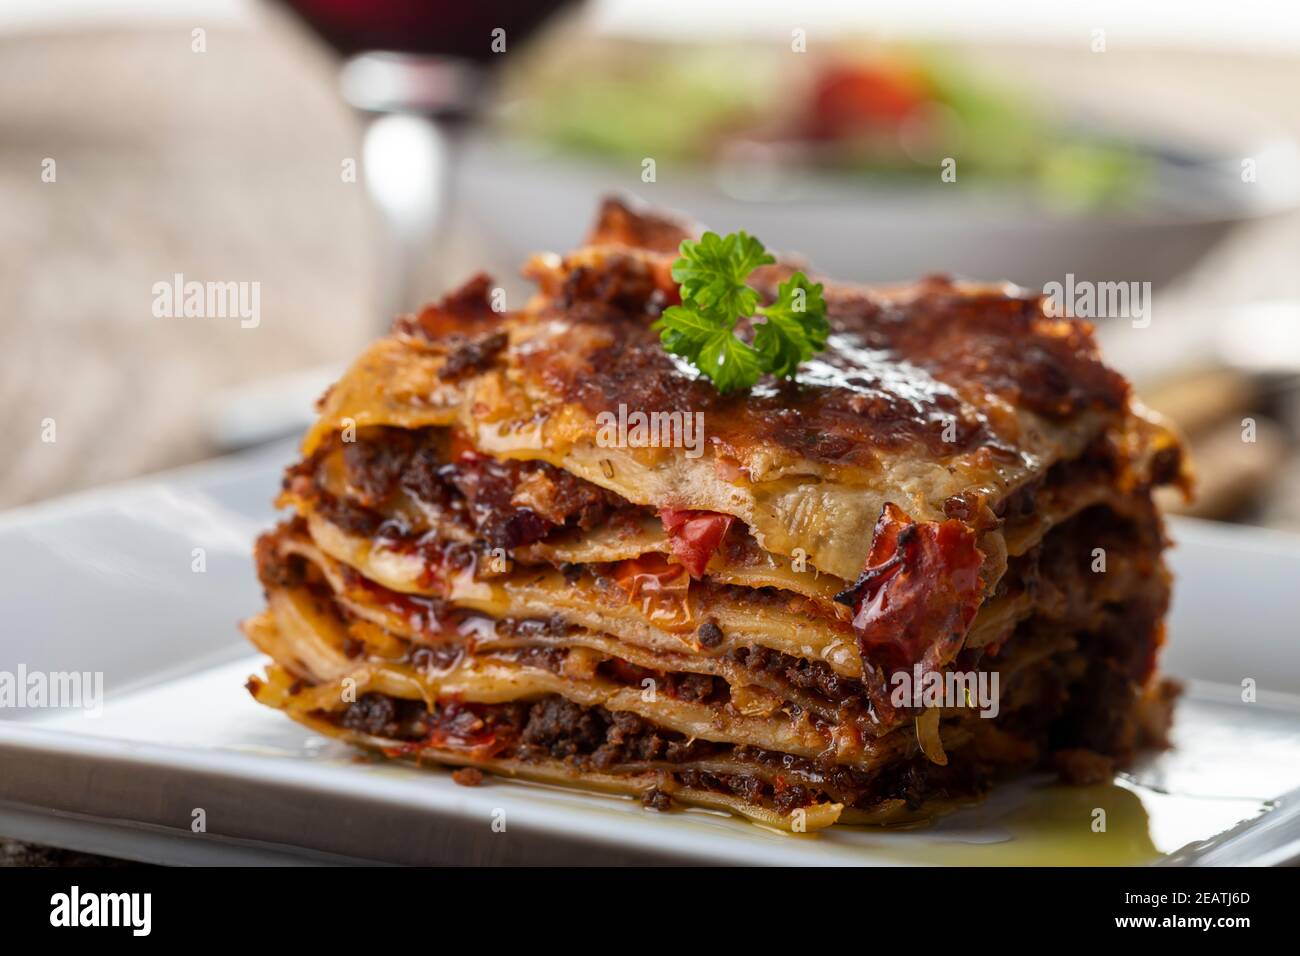 portion of lasagna on a plate Stock Photo